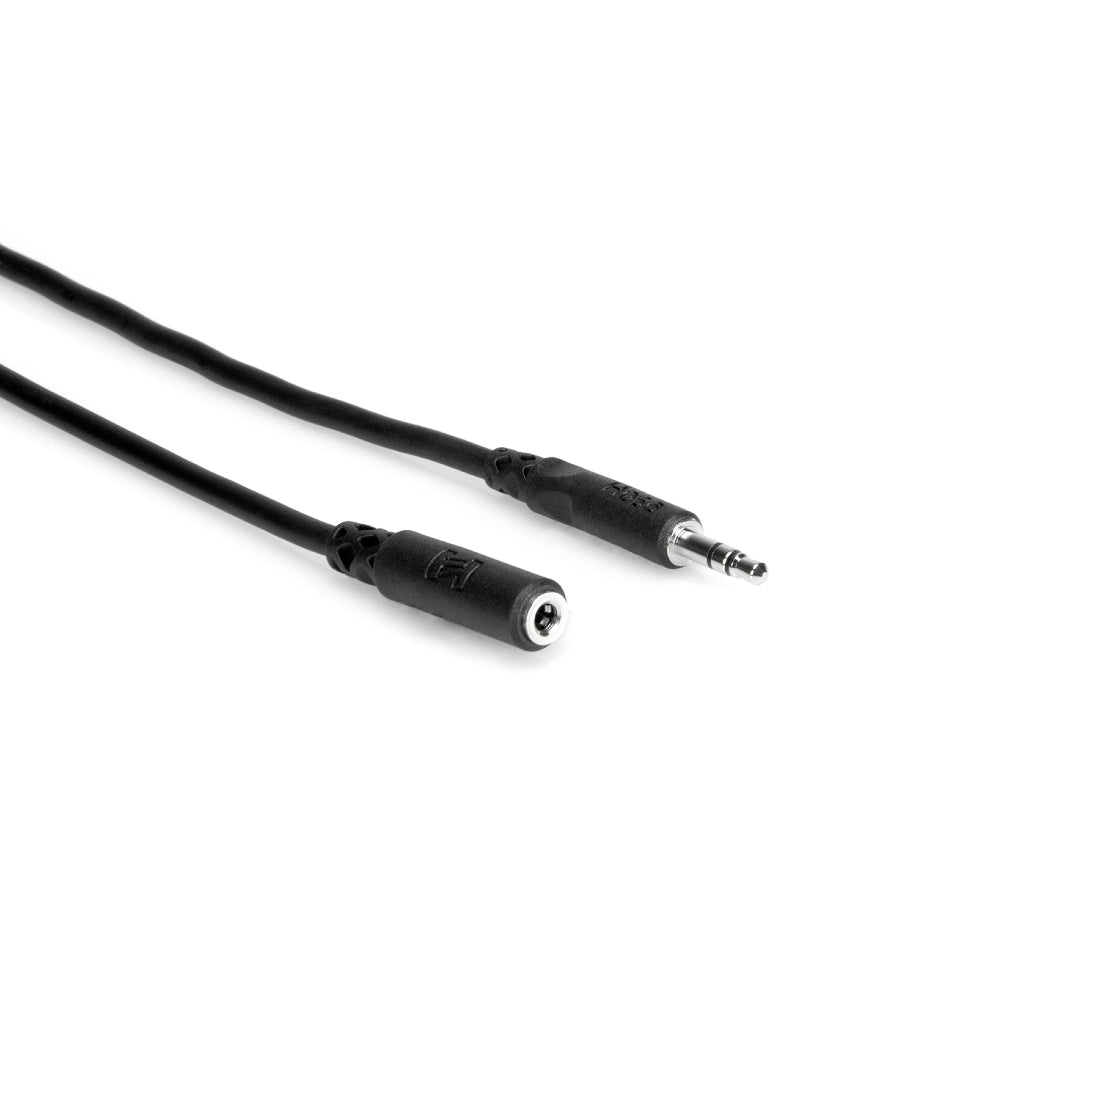 Hosa MHE-110 10ft Headphone Cable - 3.5mm TRS to Same